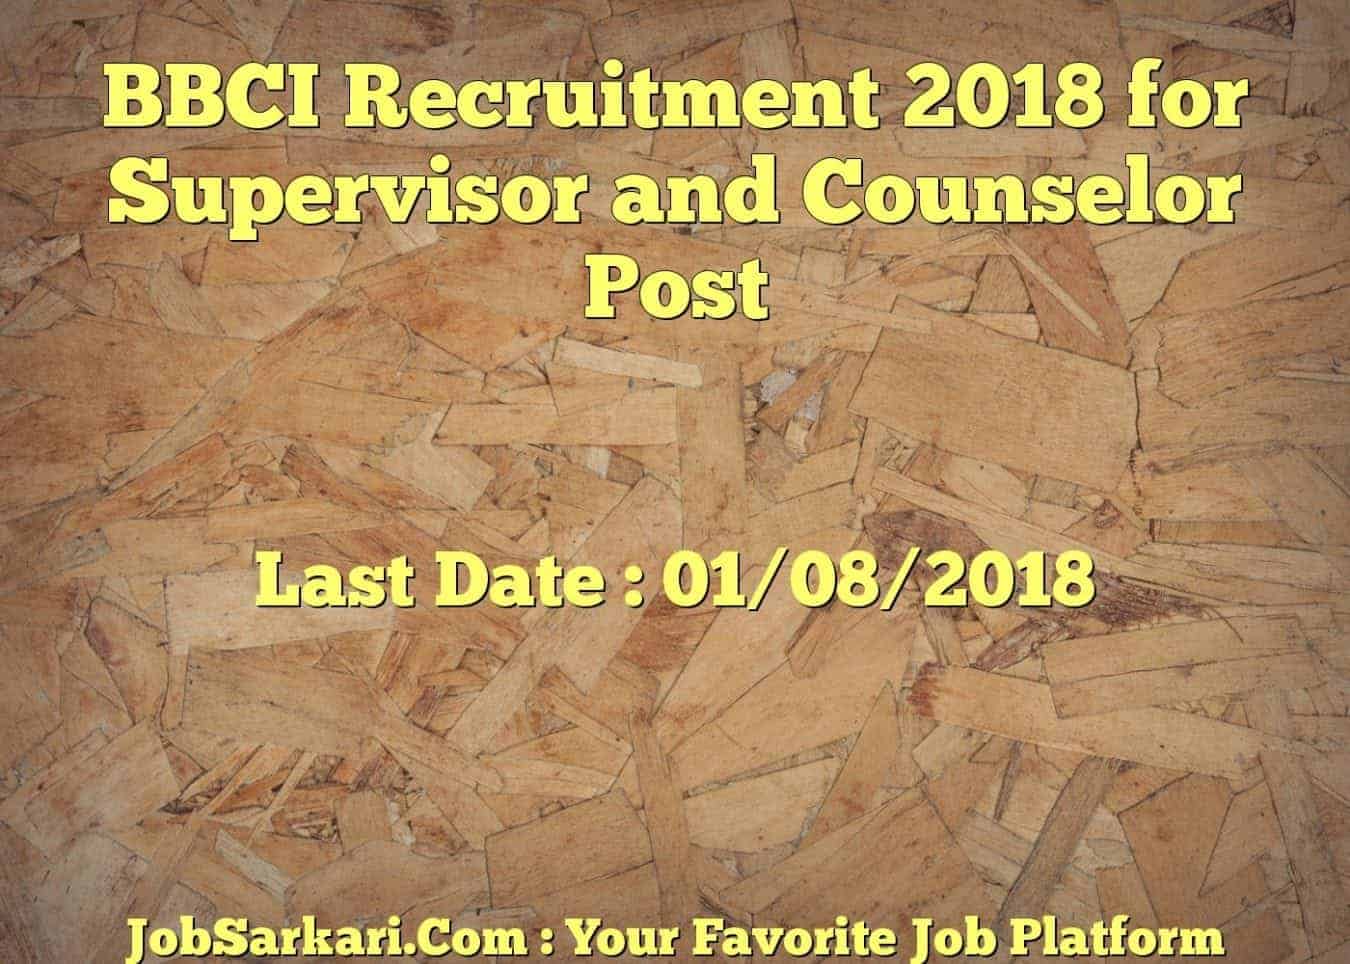 BBCI Recruitment 2018 for Supervisor and Counselor Post